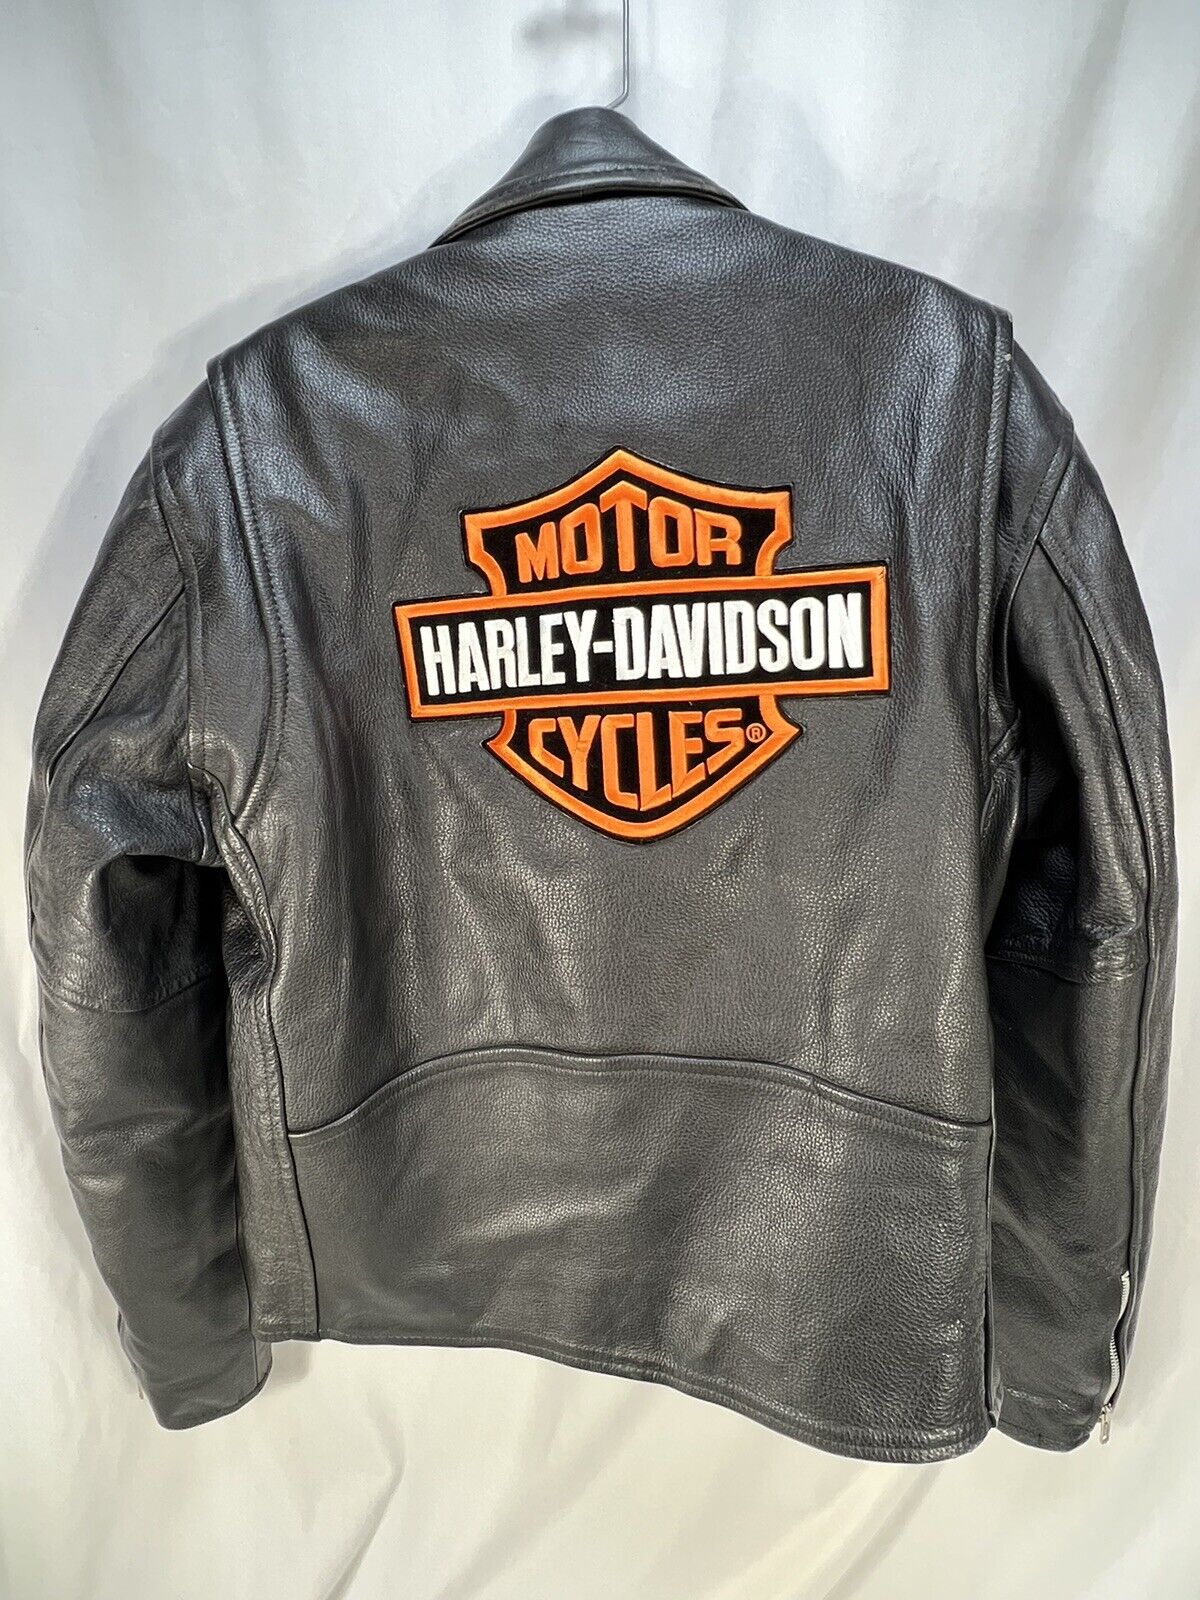 Harley Davidson Owners Club Patched Ridding Jacket By American Top Size 42